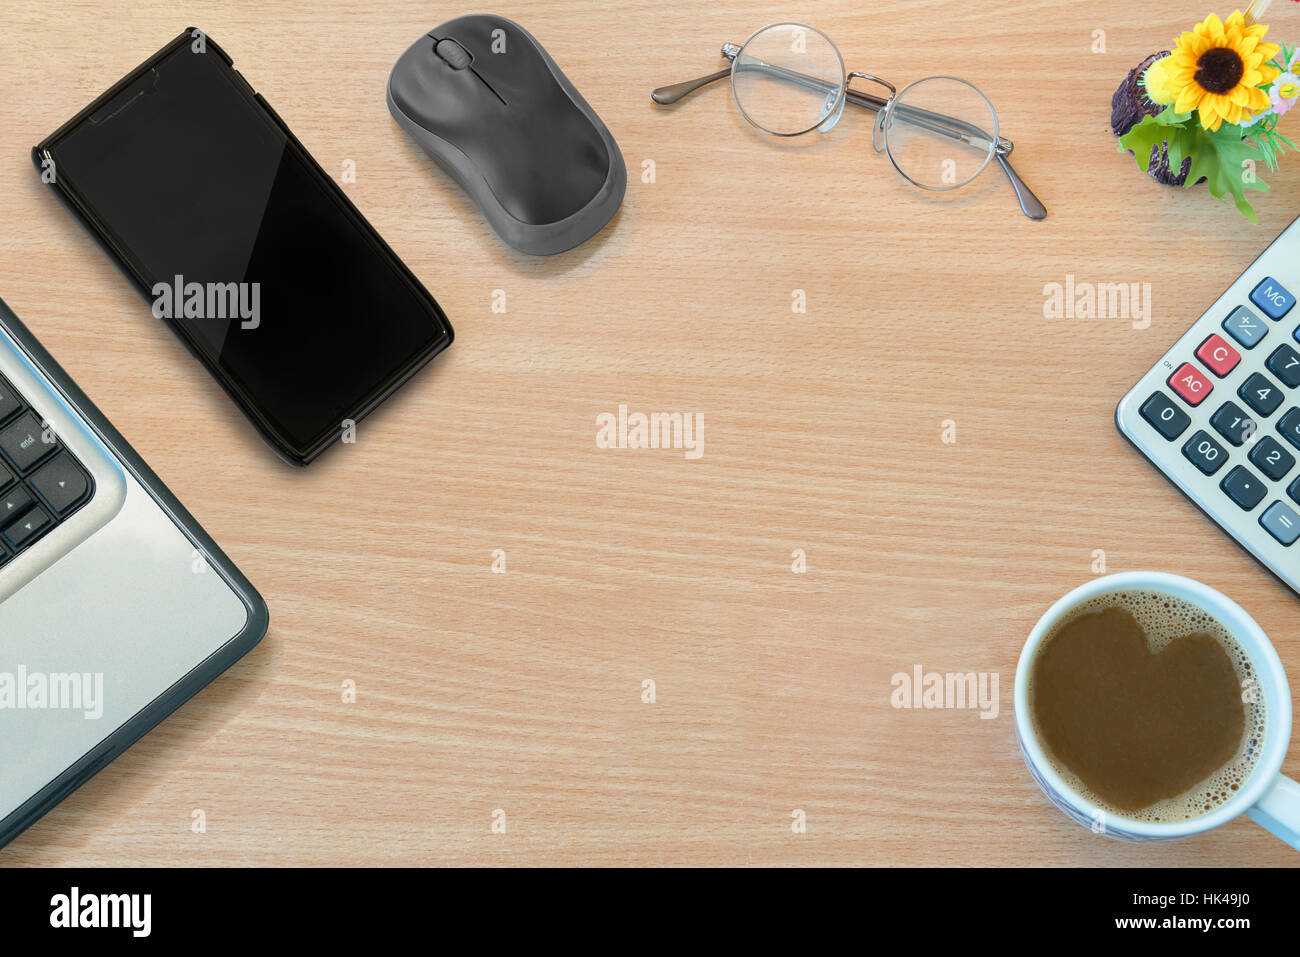 Top View Of Business Office Wood Desktop With Laptop/PC, Mobile Phone, Mouse, Glasses, Flower, Calculator And Cup Of Coffee Stock Photo